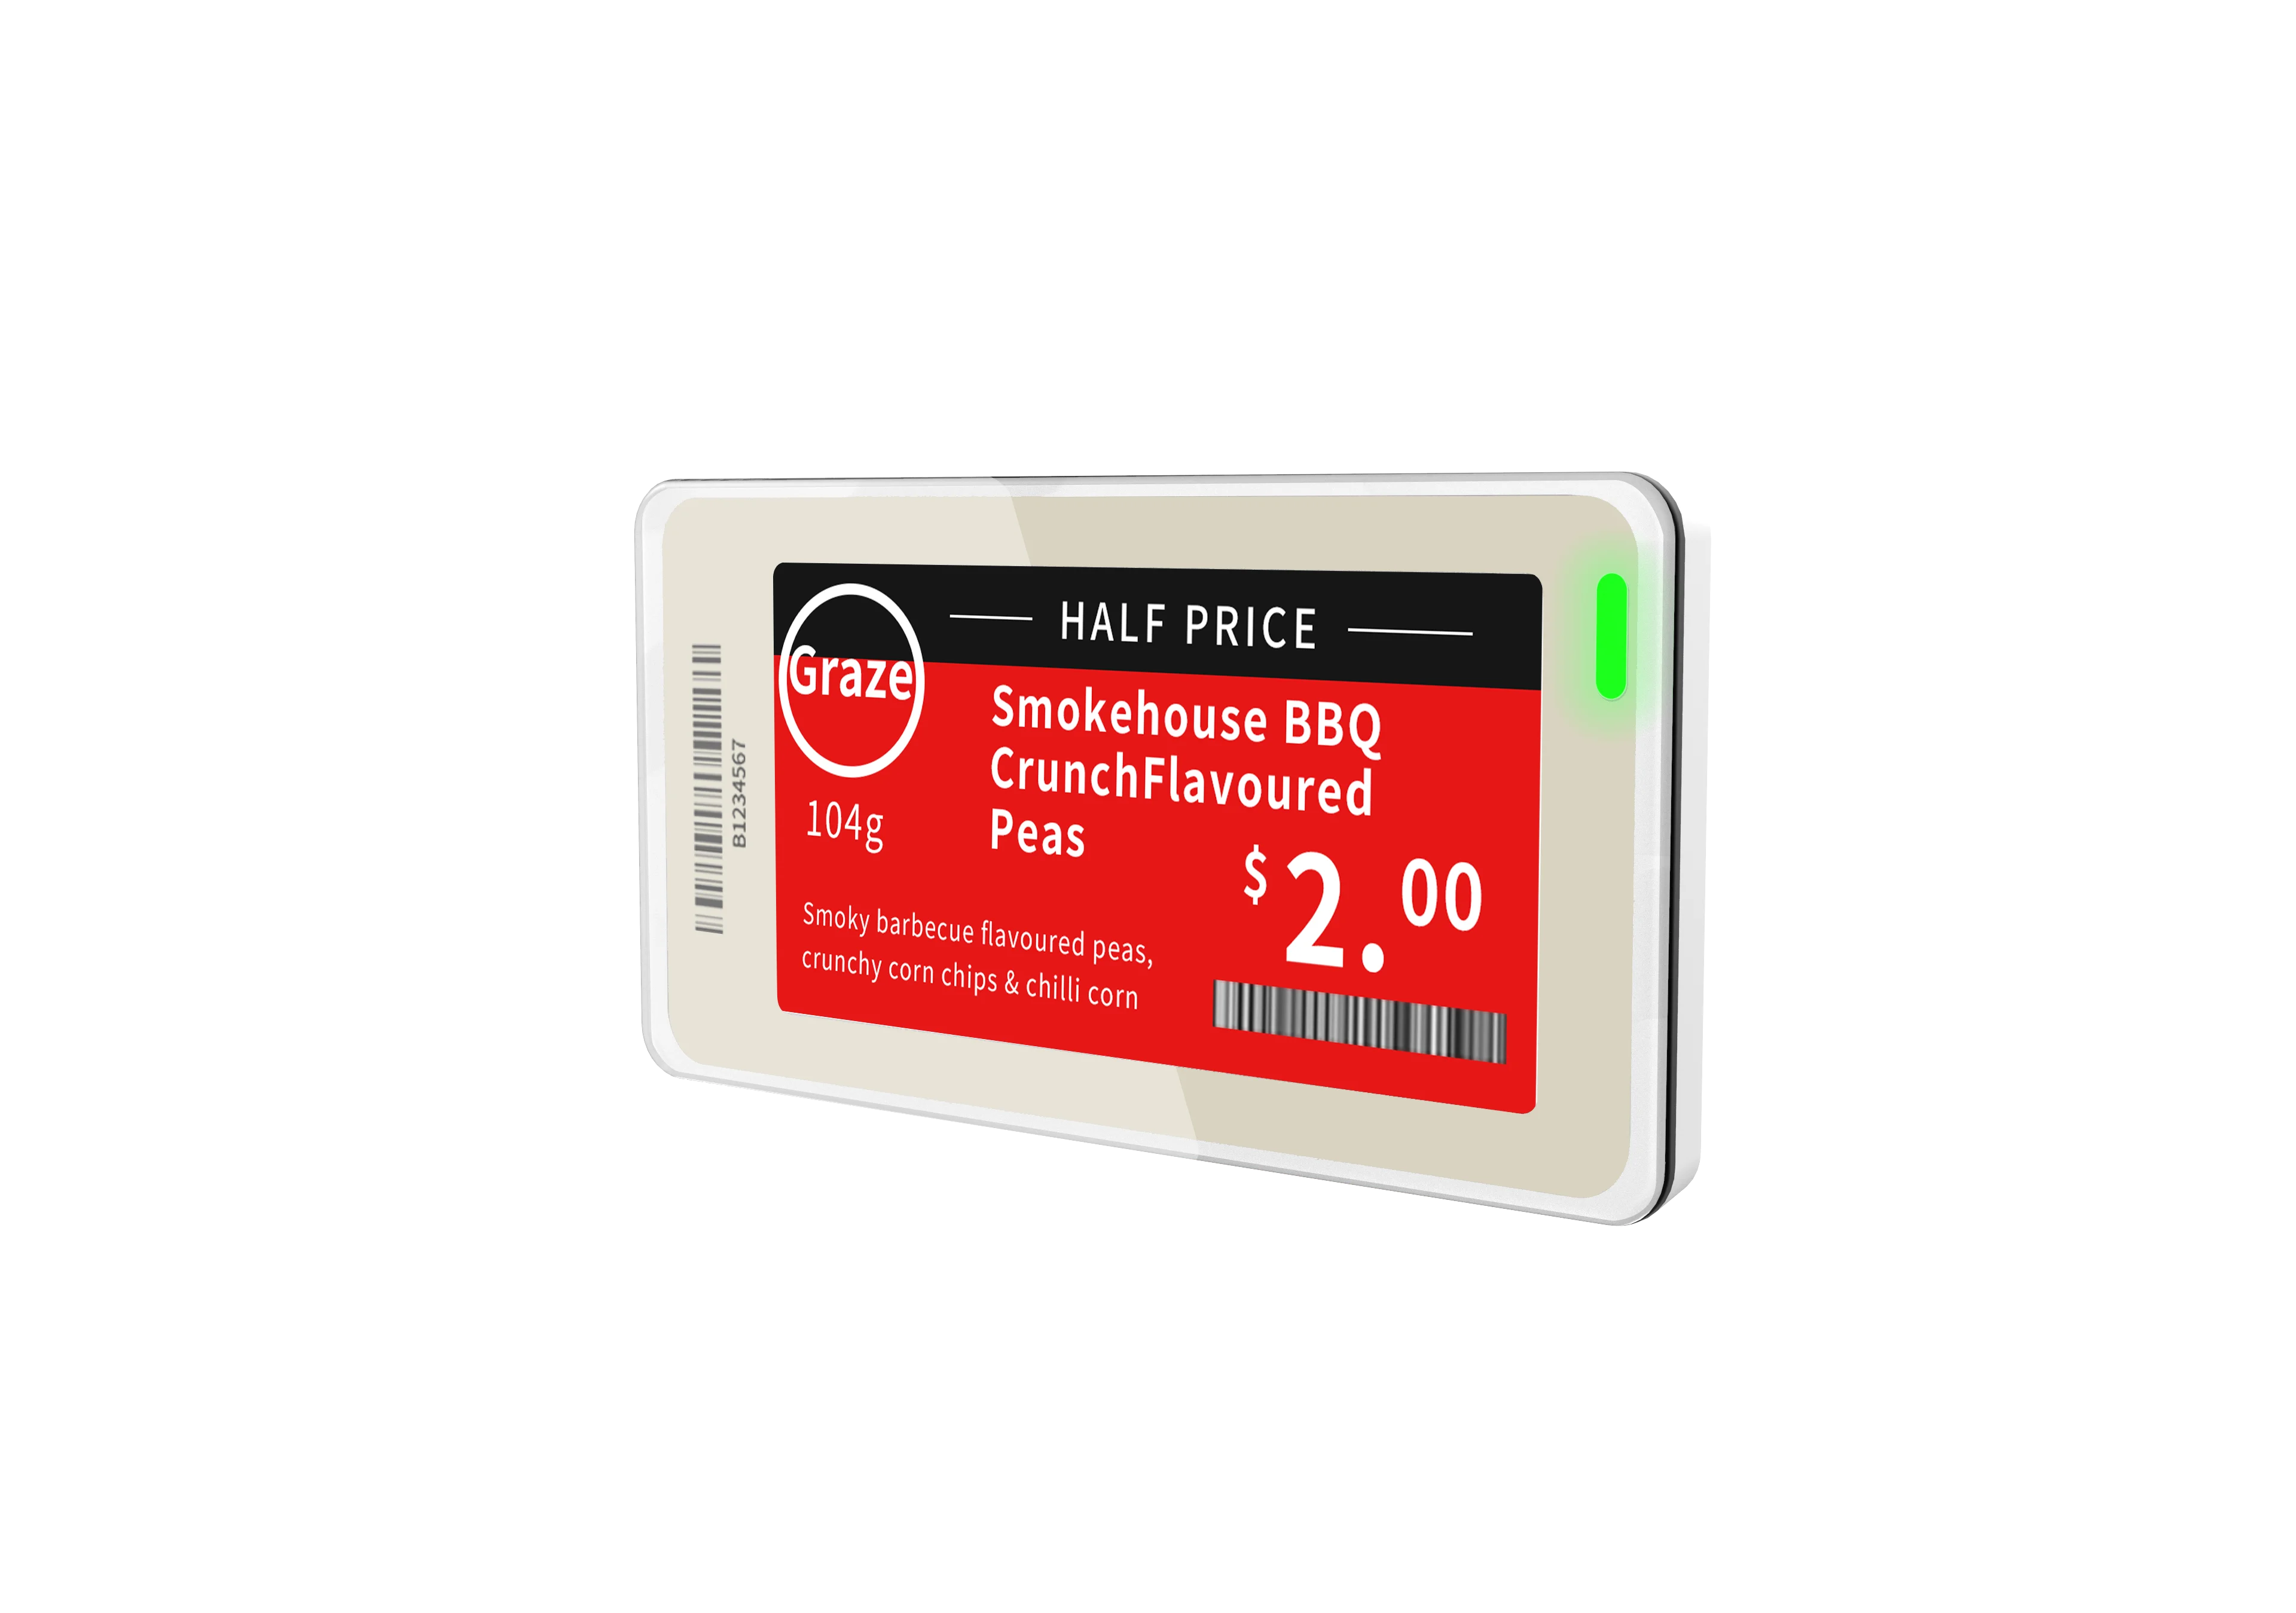 Yar26 Digital Price Tags For Retail Internet Of Things Projects